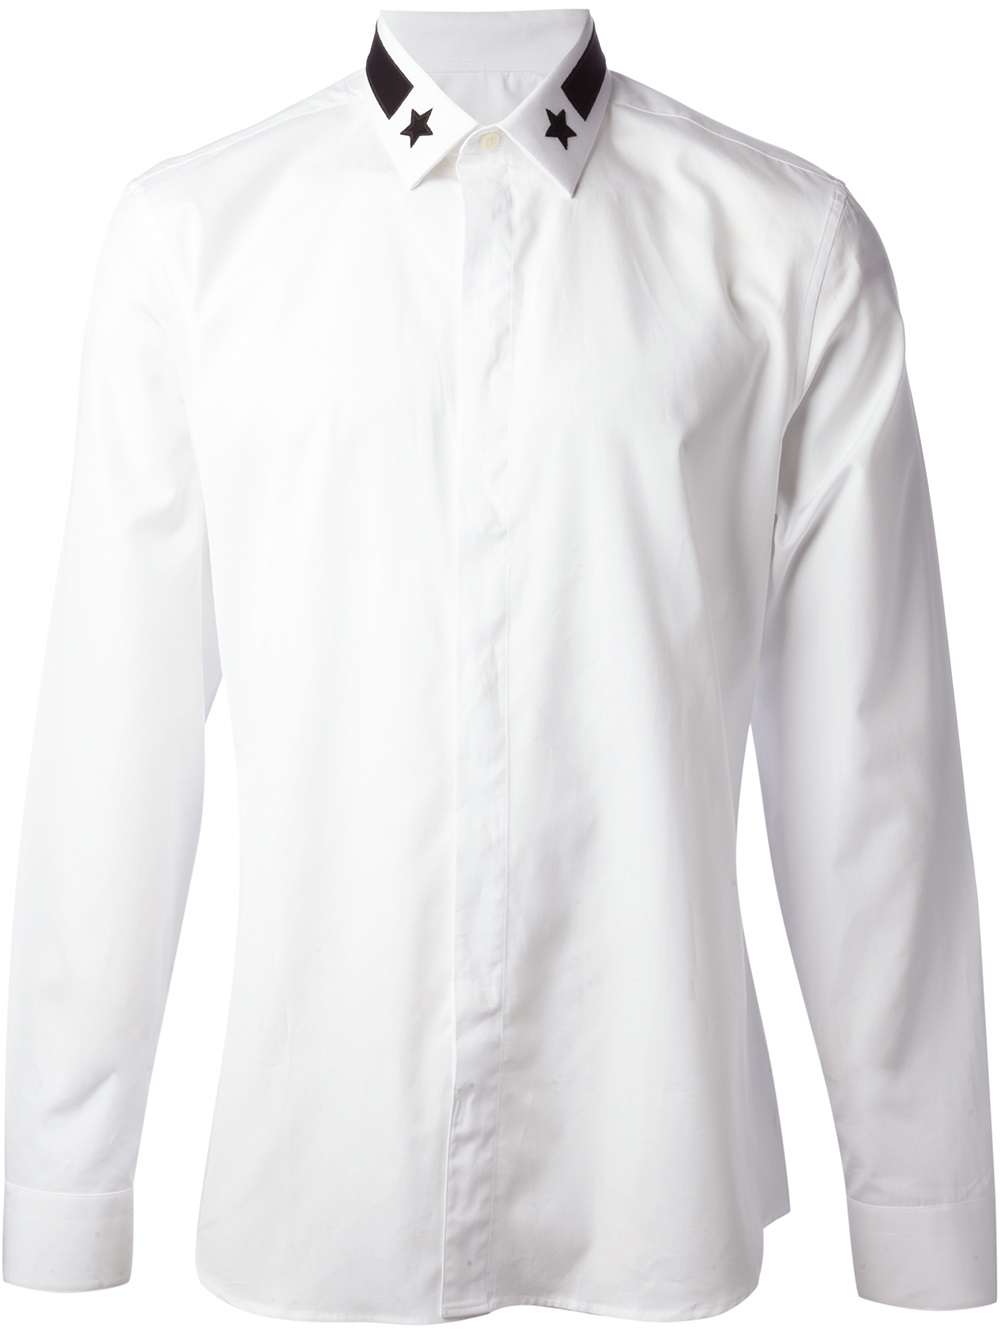 Givenchy Star Collar Shirt in White for Men   Lyst